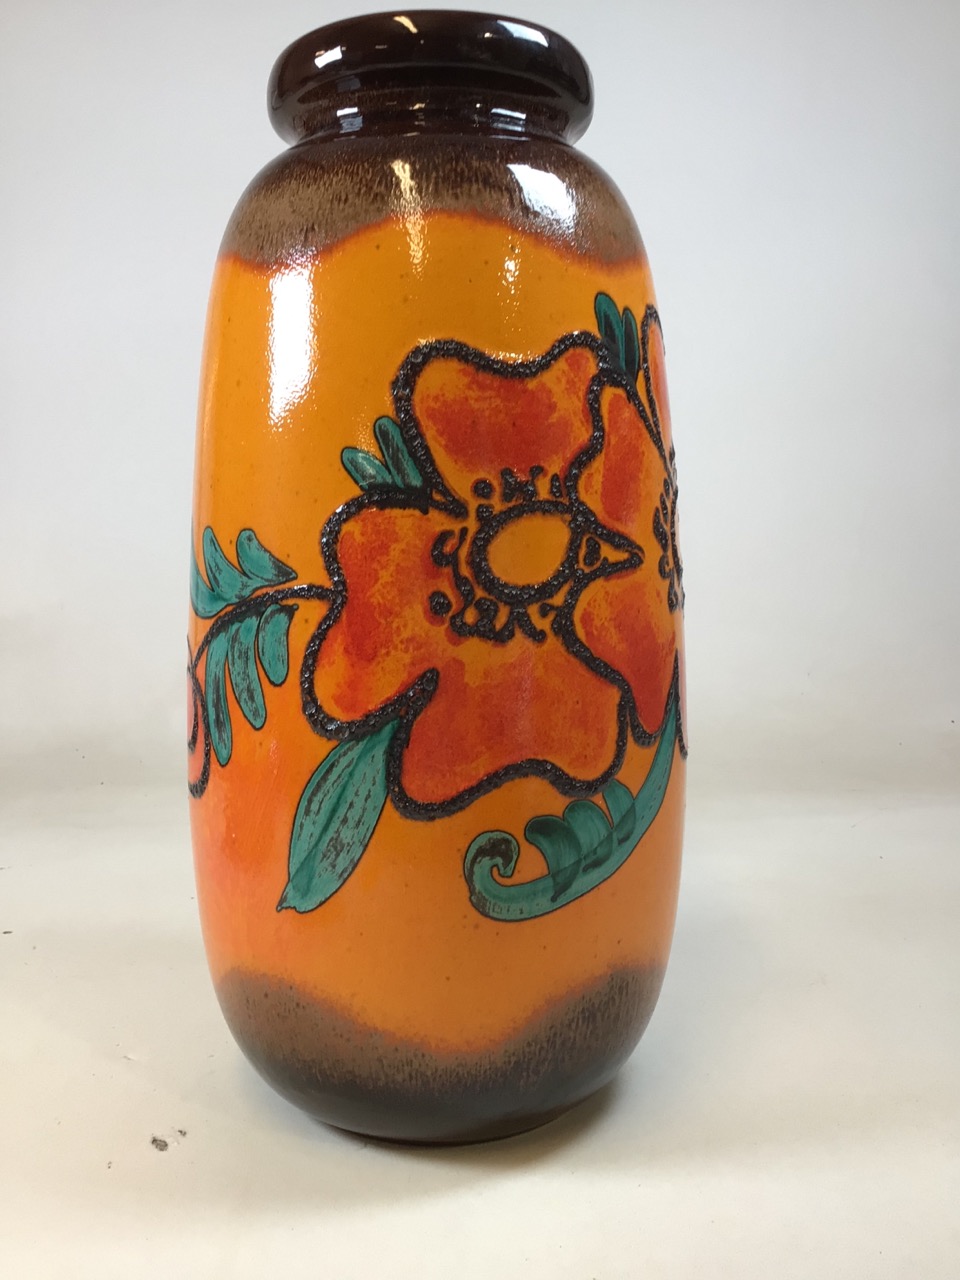 West German Fat Lava pottery floor vase model 284-53. Bright orange ground with orange and red